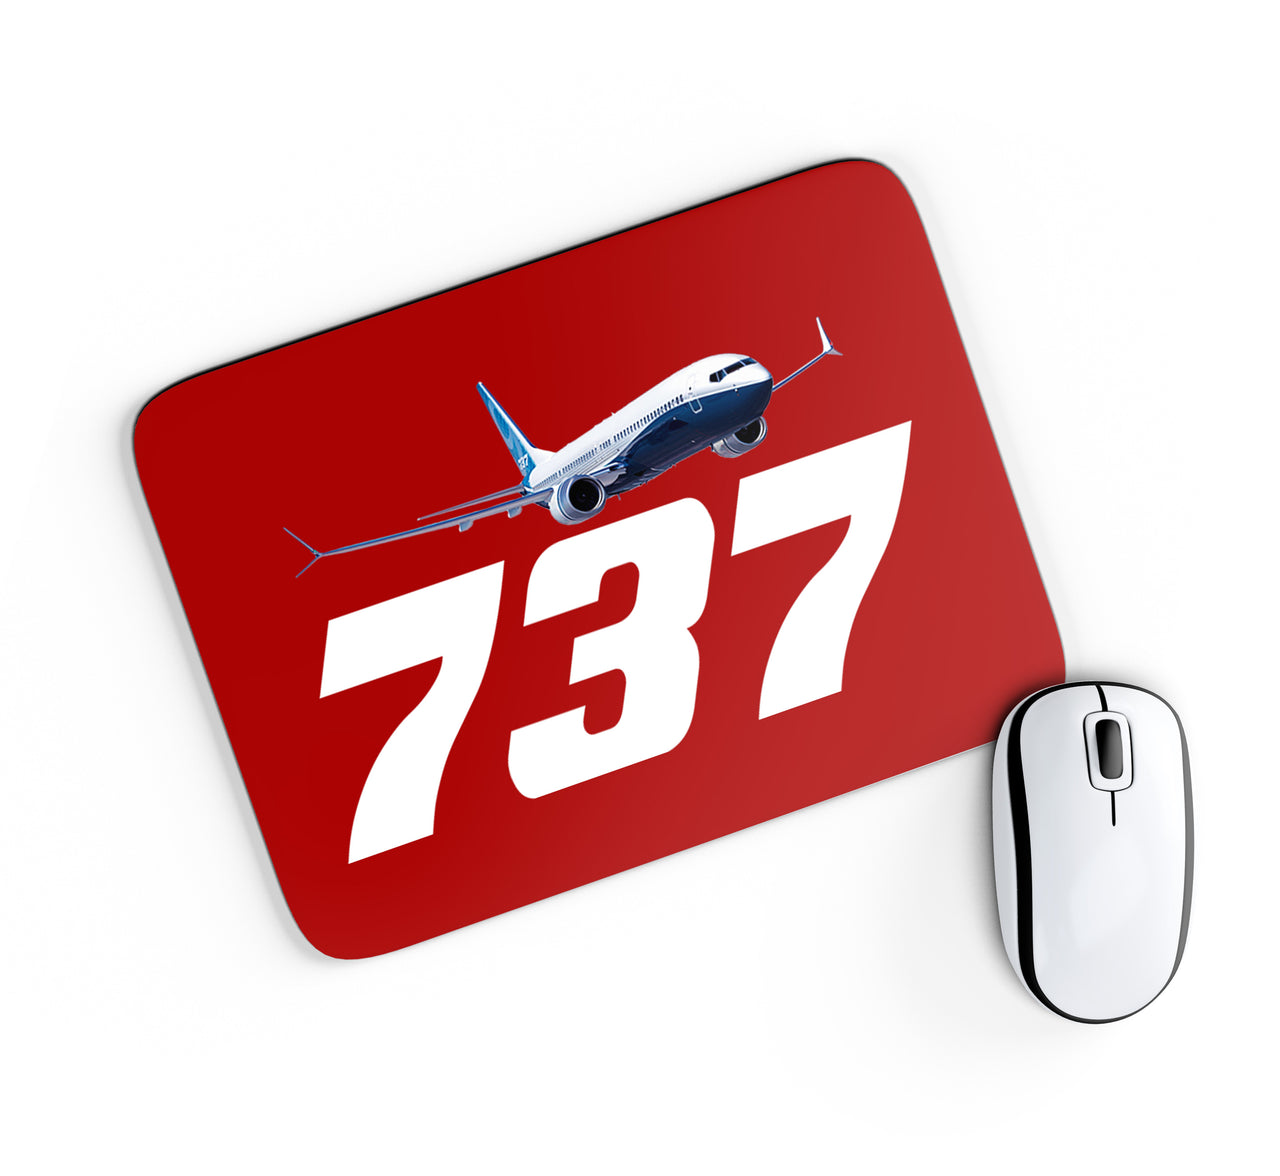 Super Boeing 737-800 Designed Mouse Pads